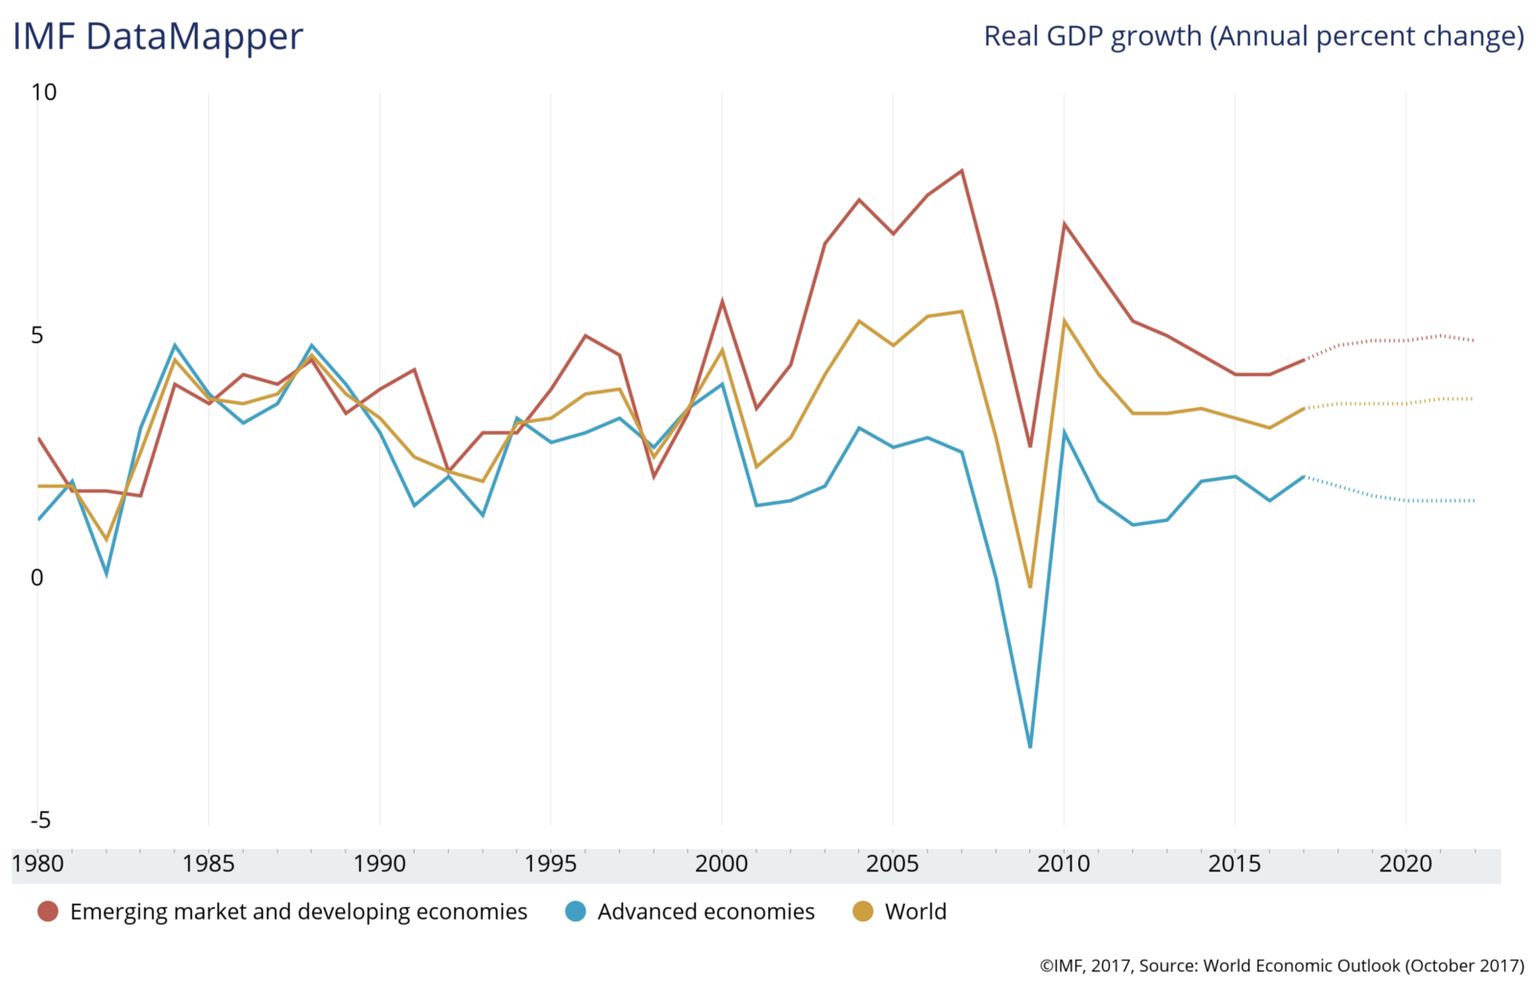 Economic growth by market